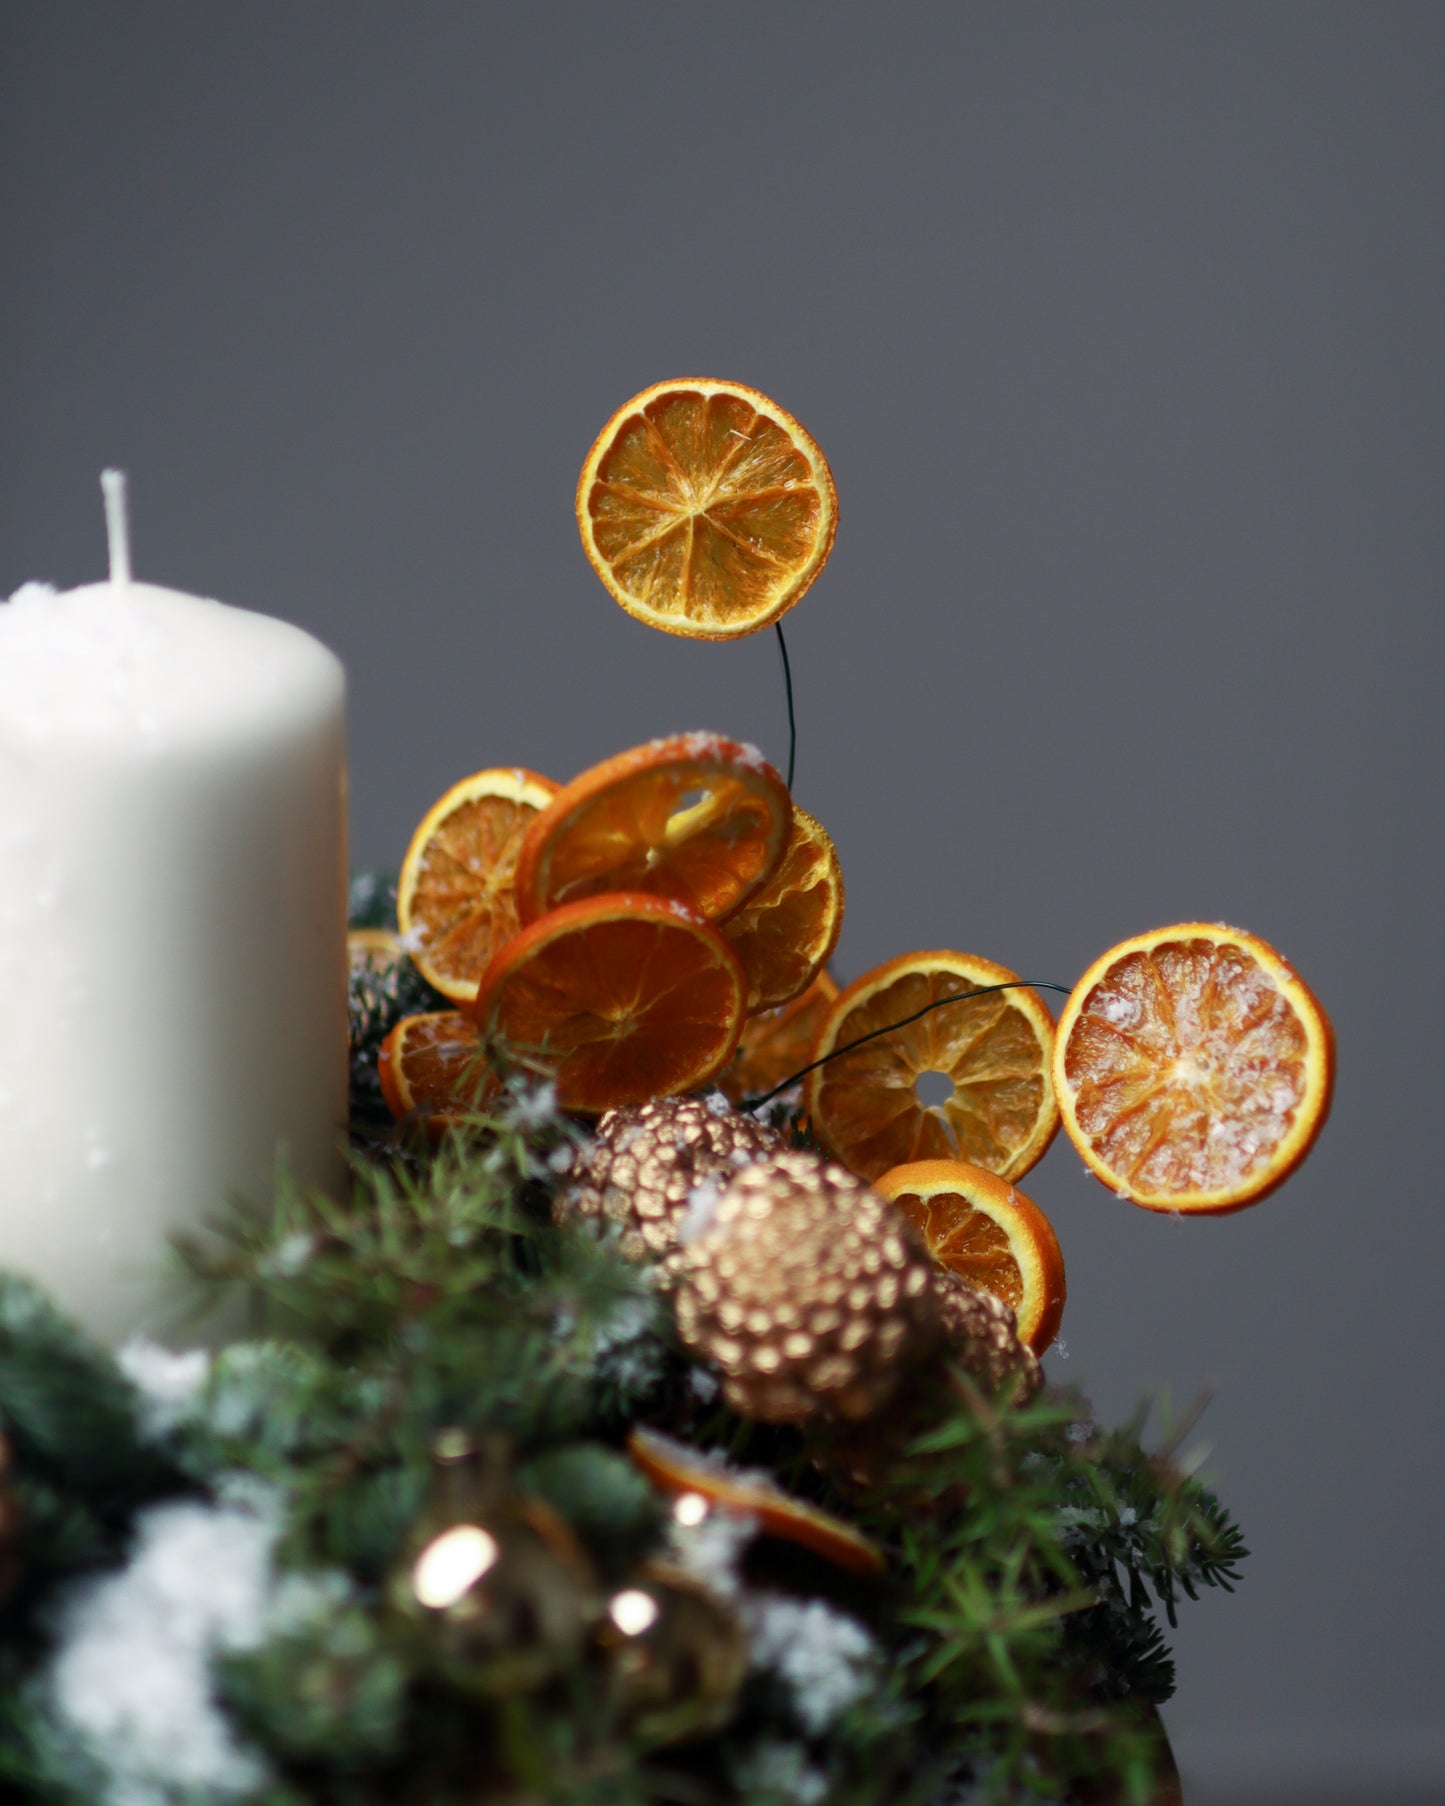 Сomposition with a candle "Orange"